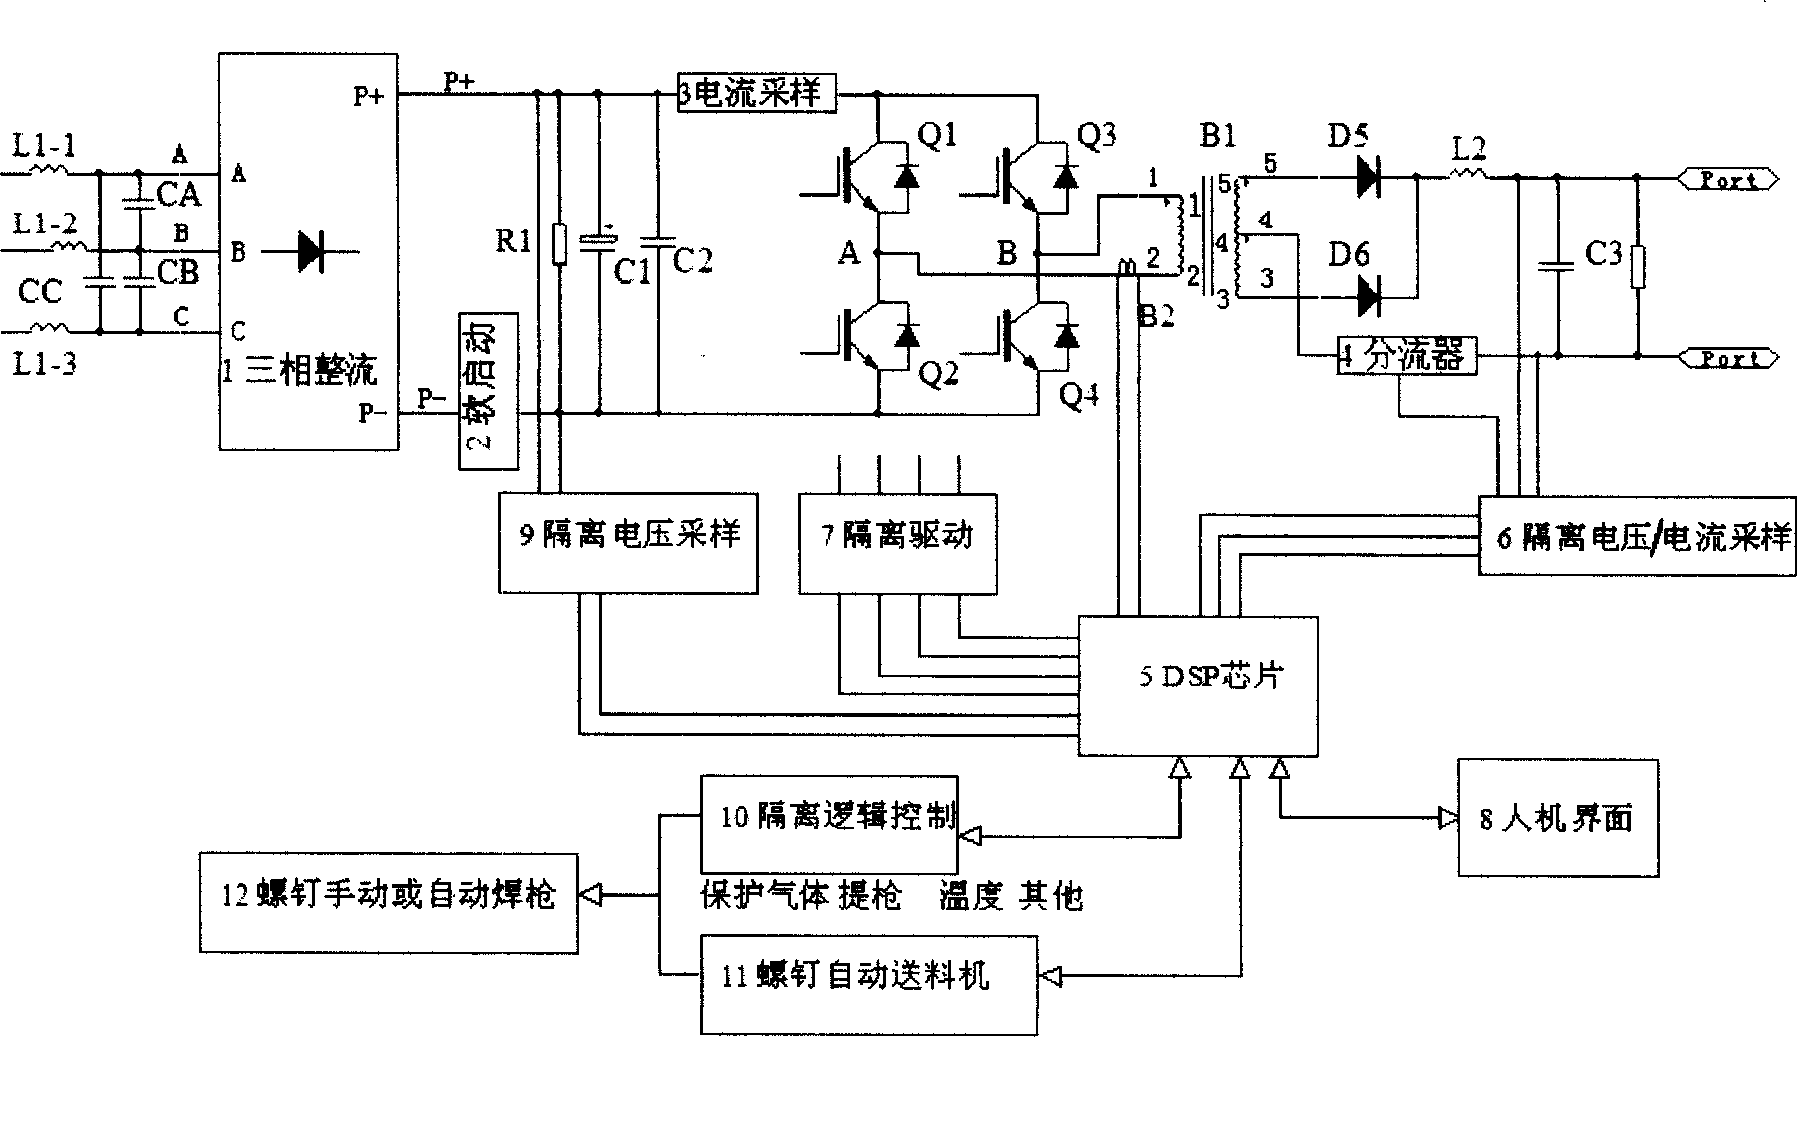 High-frequency inversion stud welding equipment and controlling means thereof